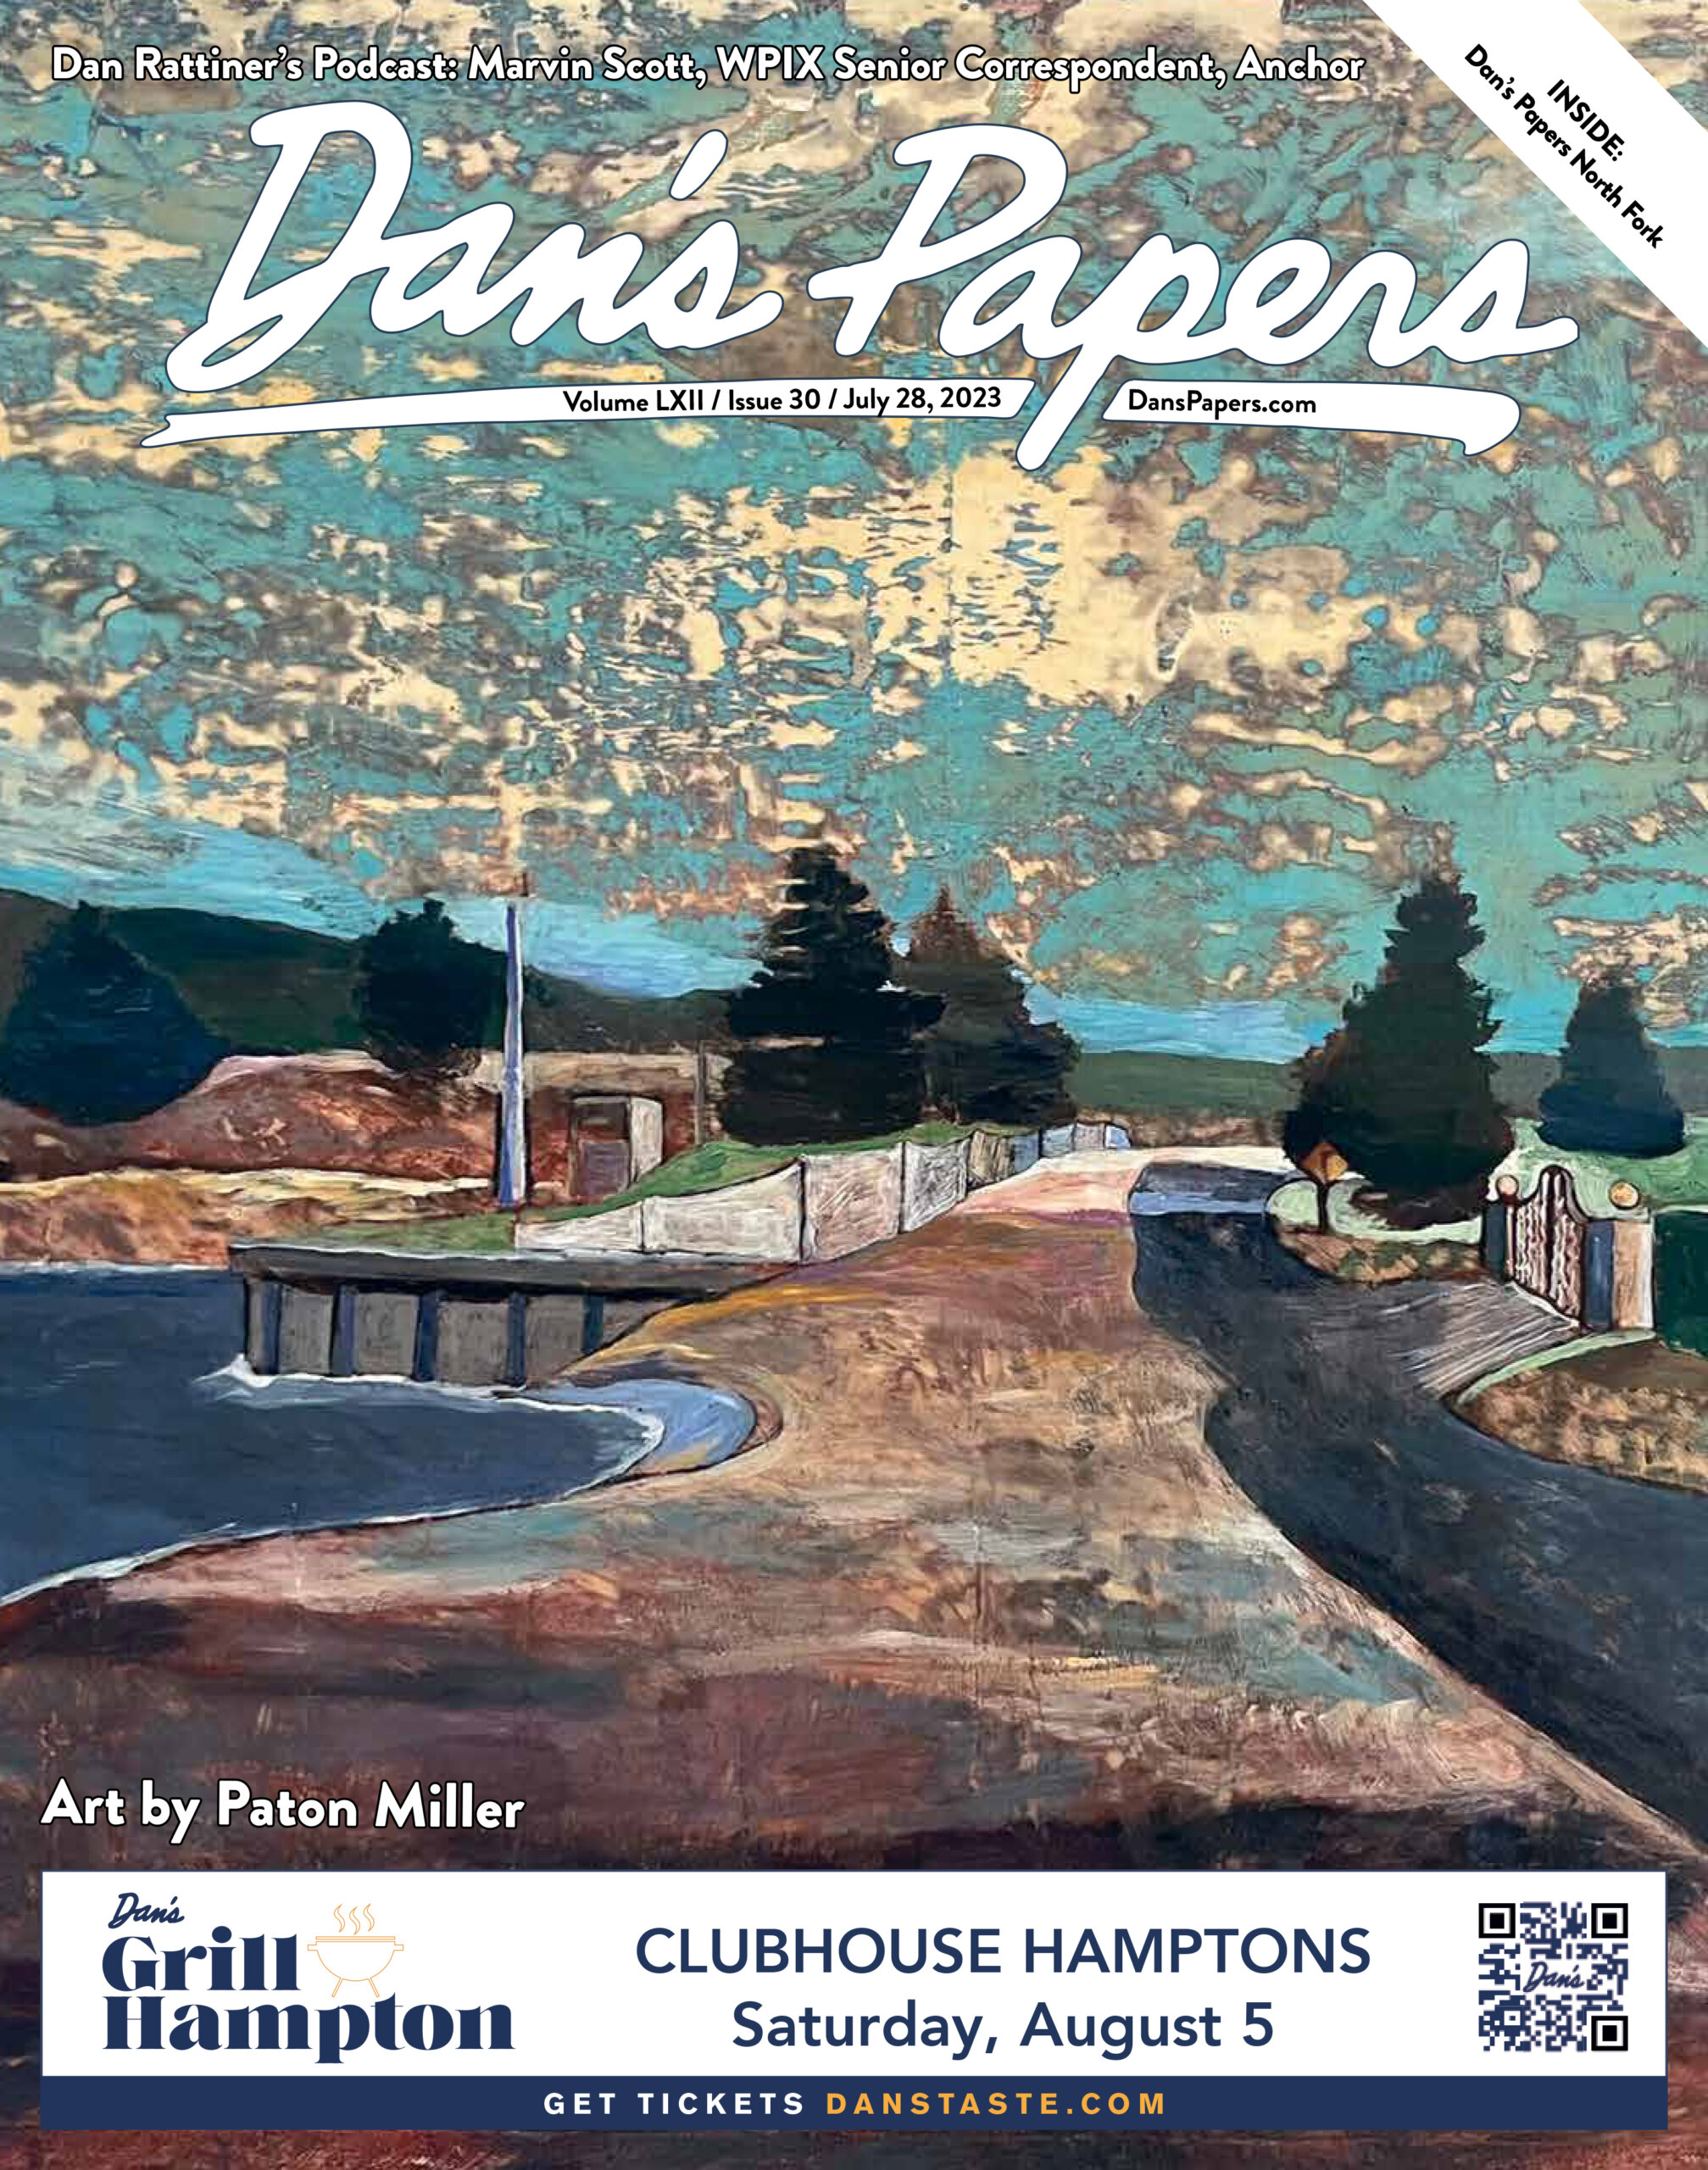 July 28, 2023 Dan's Papers cover art by Paton Miller